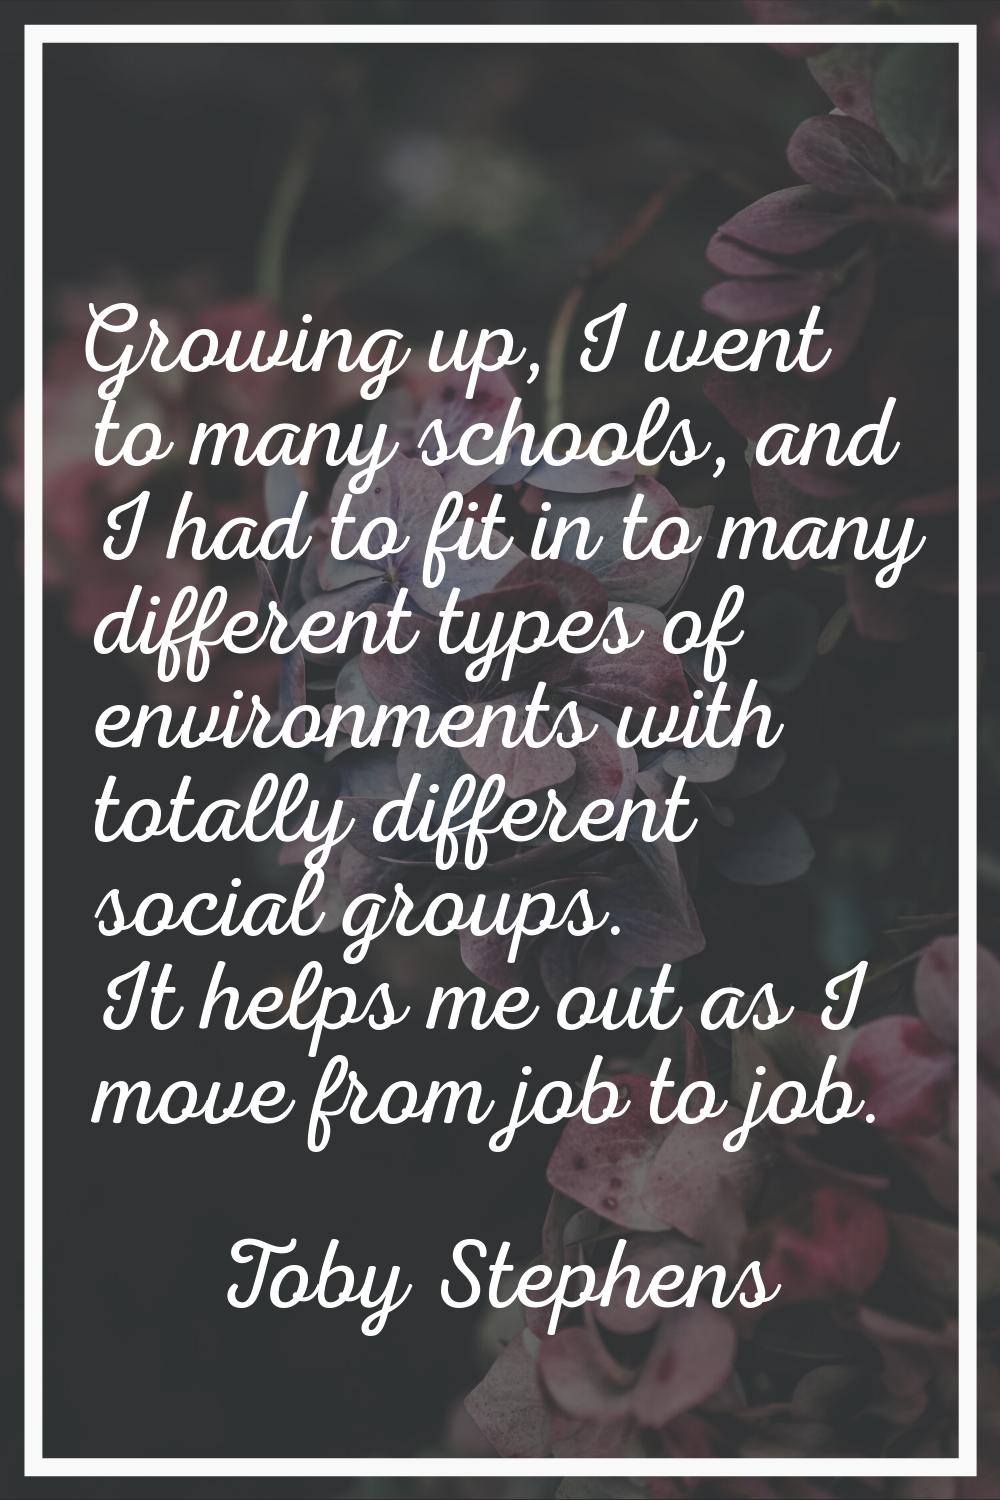 Growing up, I went to many schools, and I had to fit in to many different types of environments wit